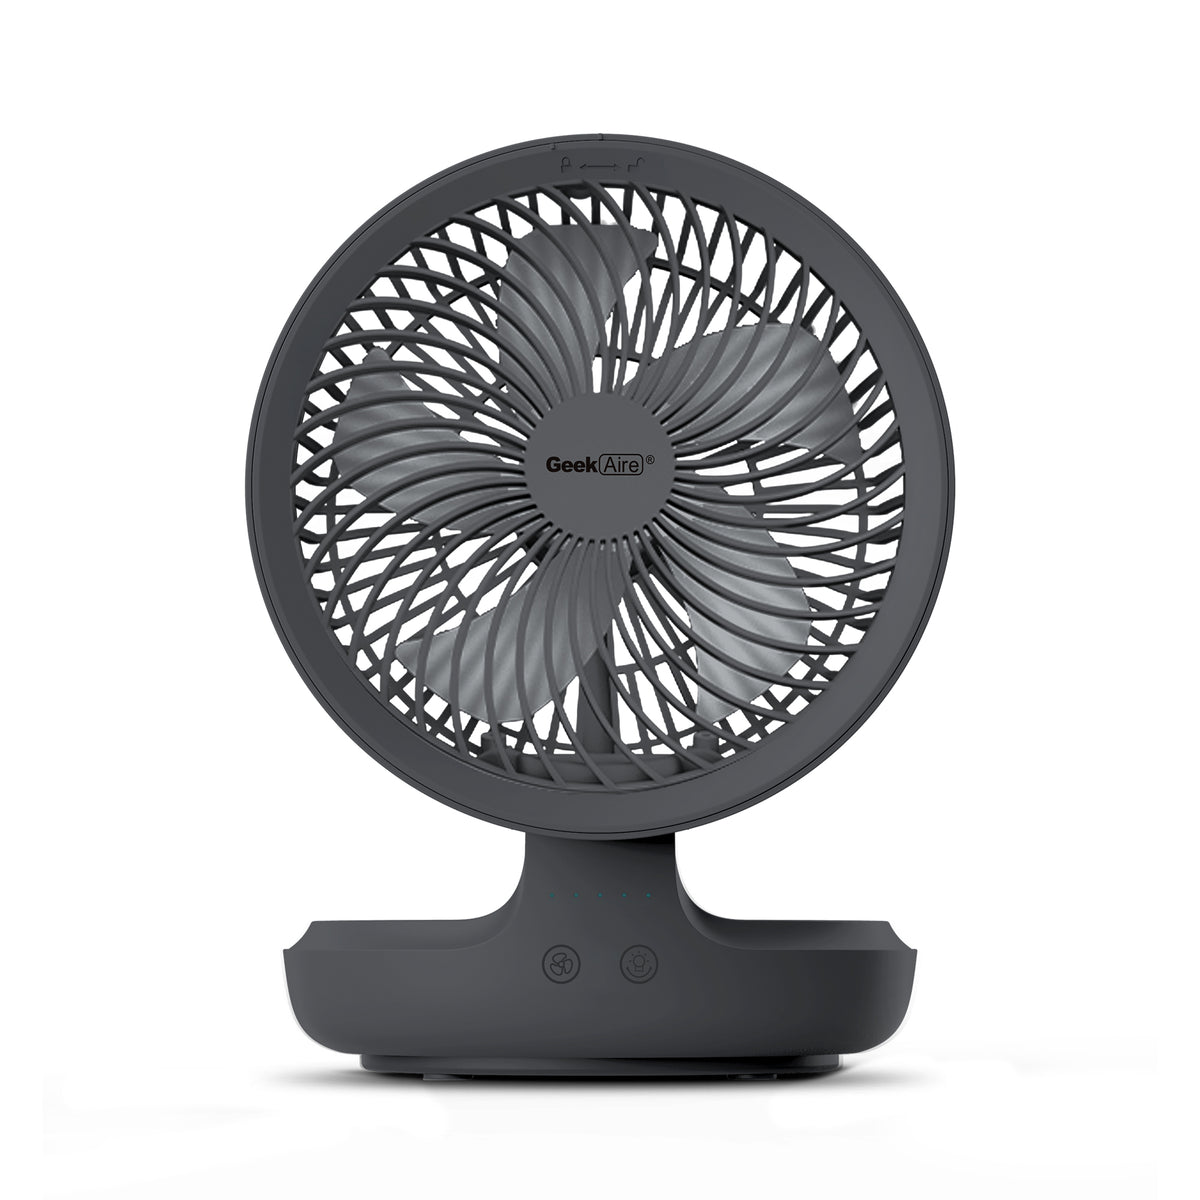 Geek Aire GF6 8 Inch Rechargeable Mini Table Fan with LED Light | Portable, Oscillating, Small Size and USB Charging | Capacitive Touch Control | 4000 mAh Battery | For Travel, Home & Office (Grey)